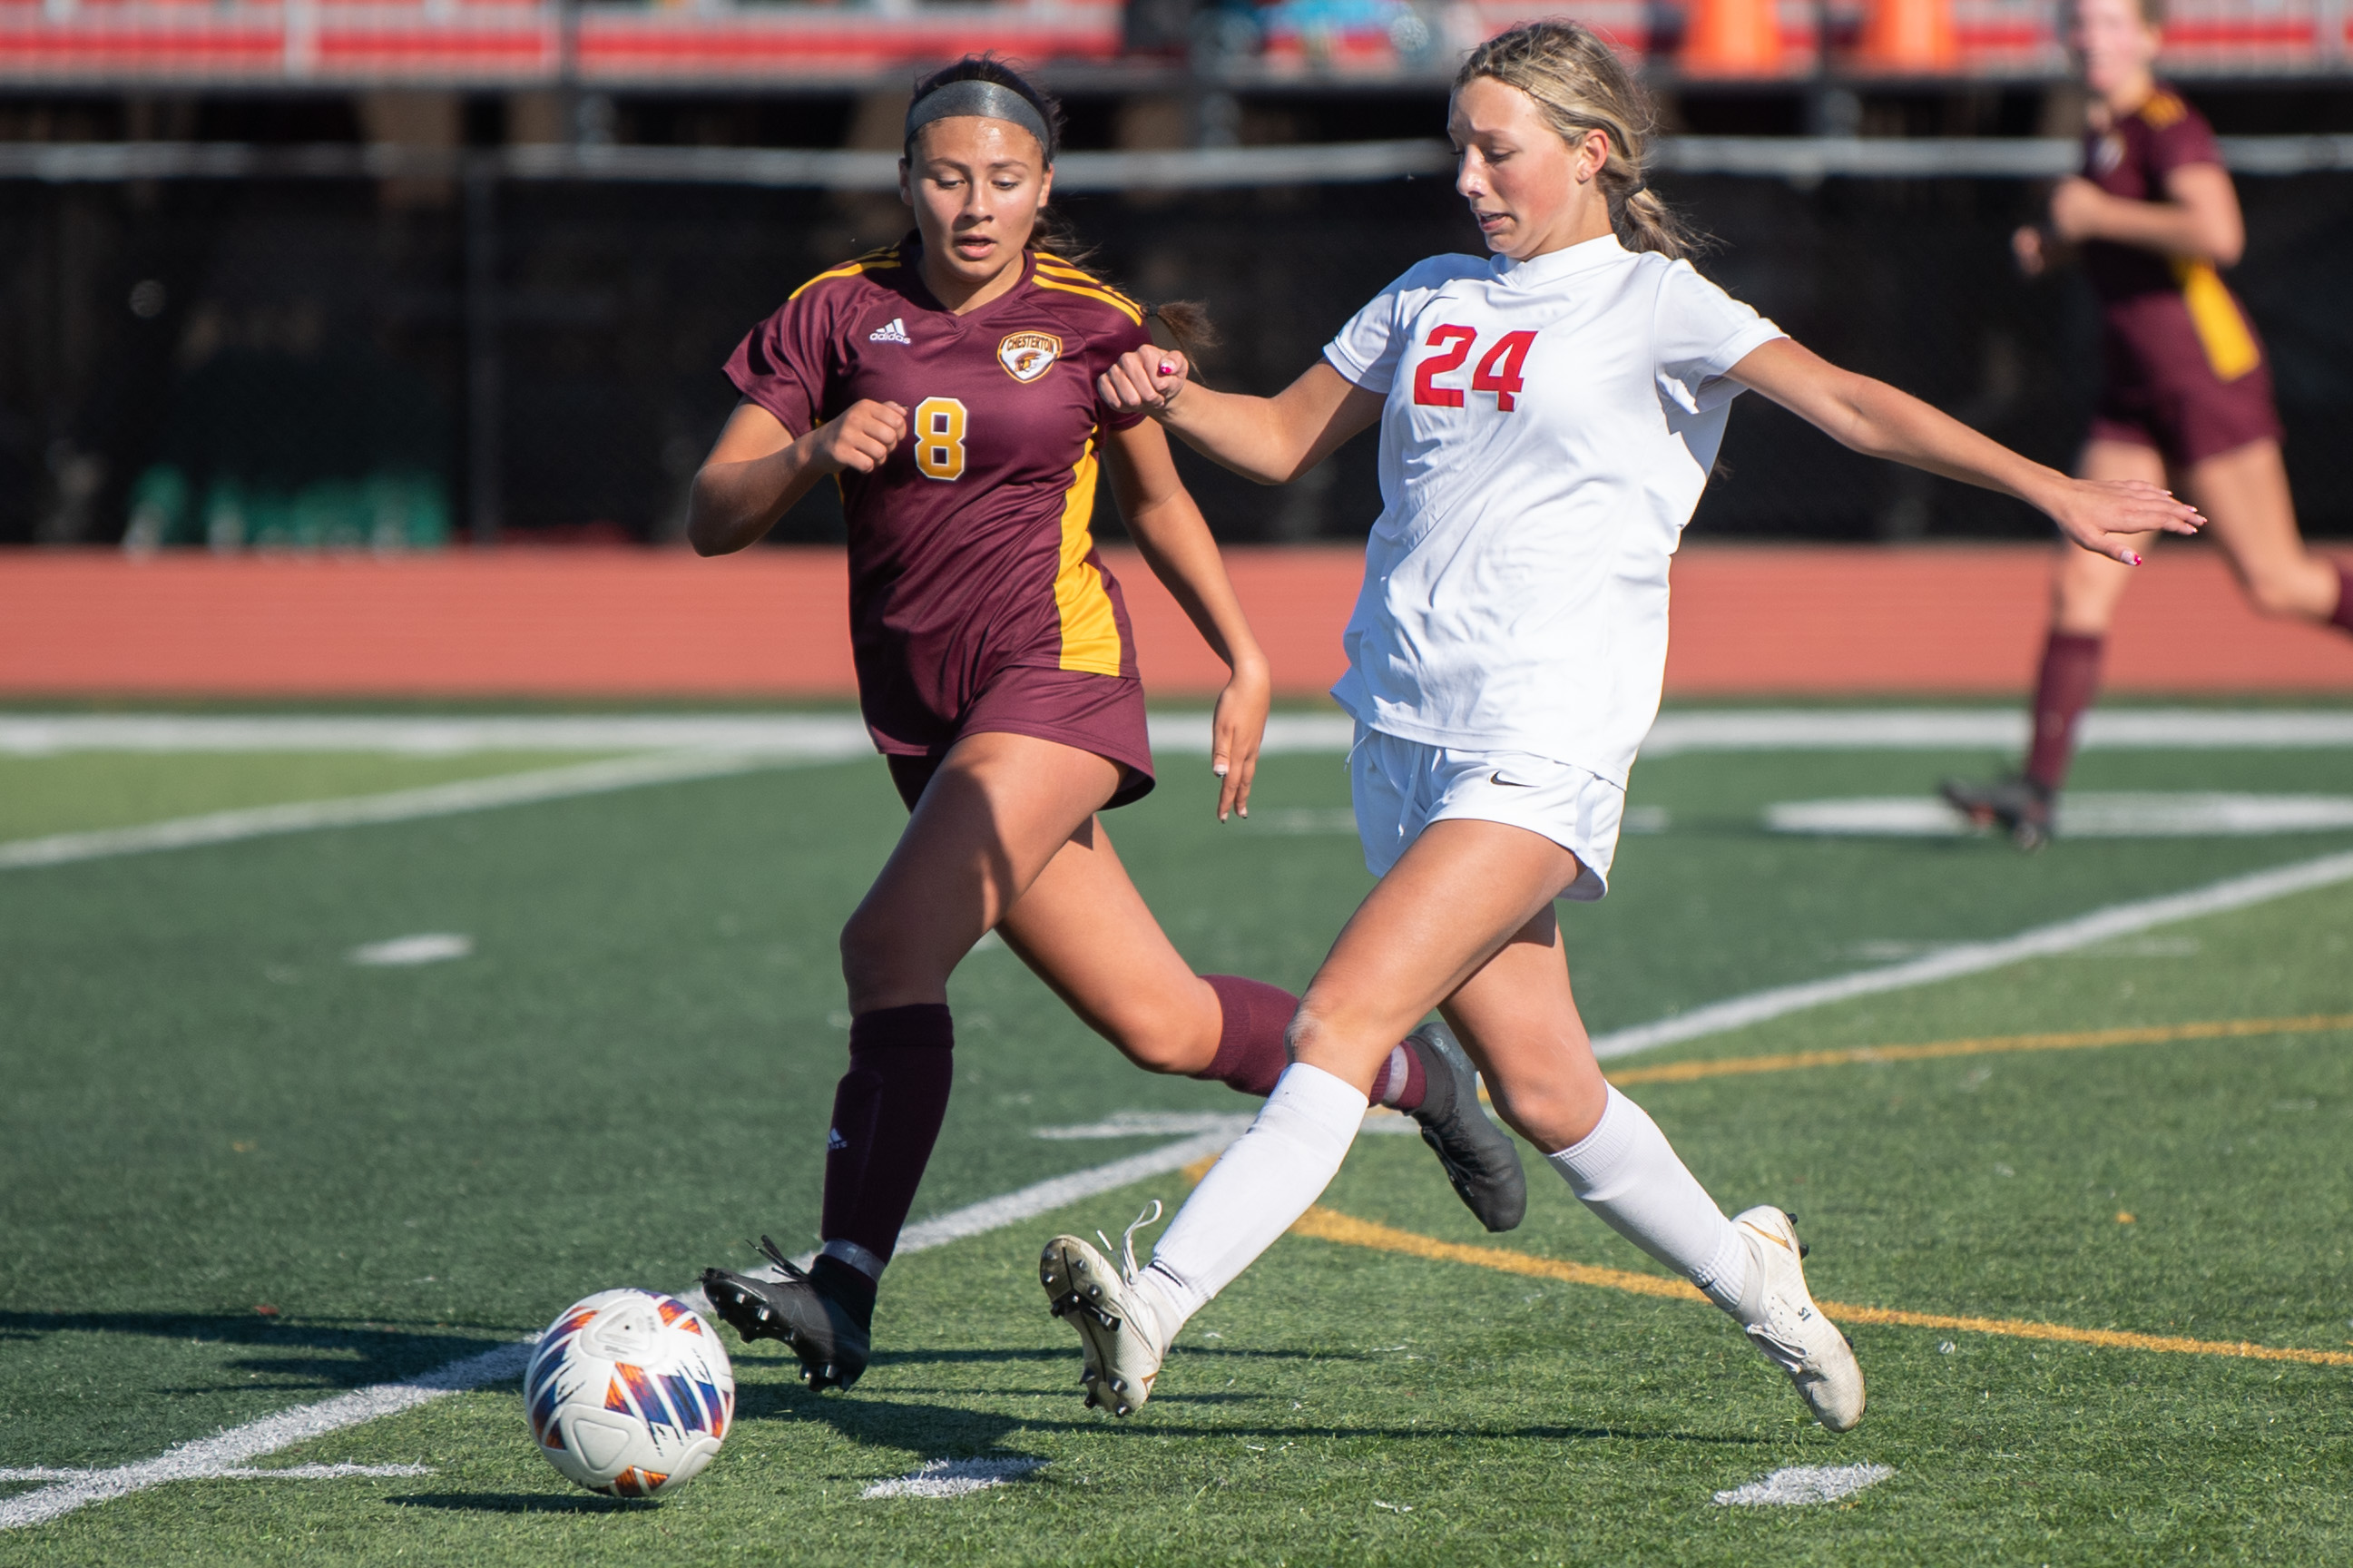 Top 10 girls soccer teams and players to watch in NW Indiana